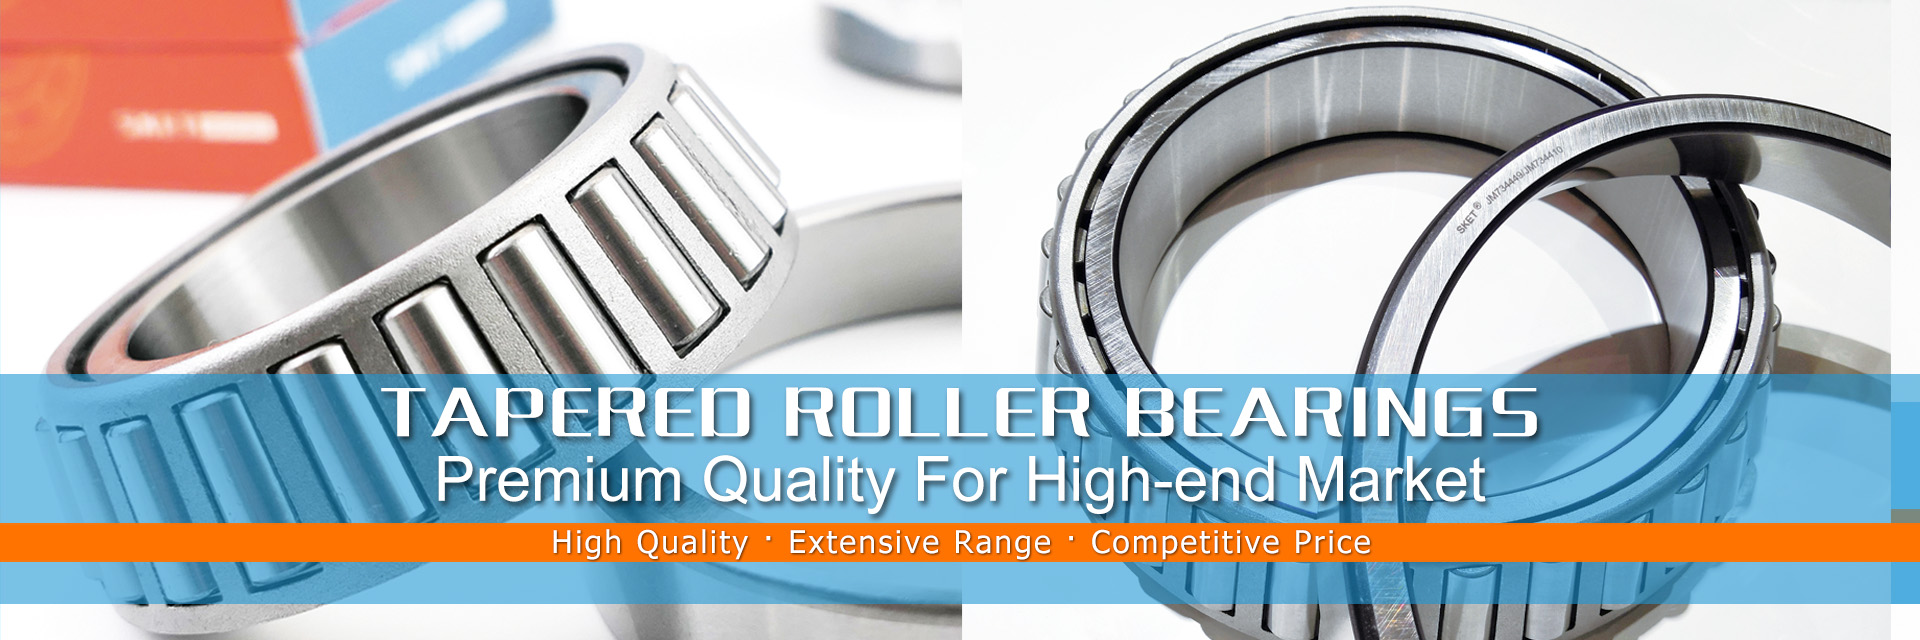 Tapered roller bearings Premium Quality for High-end Market